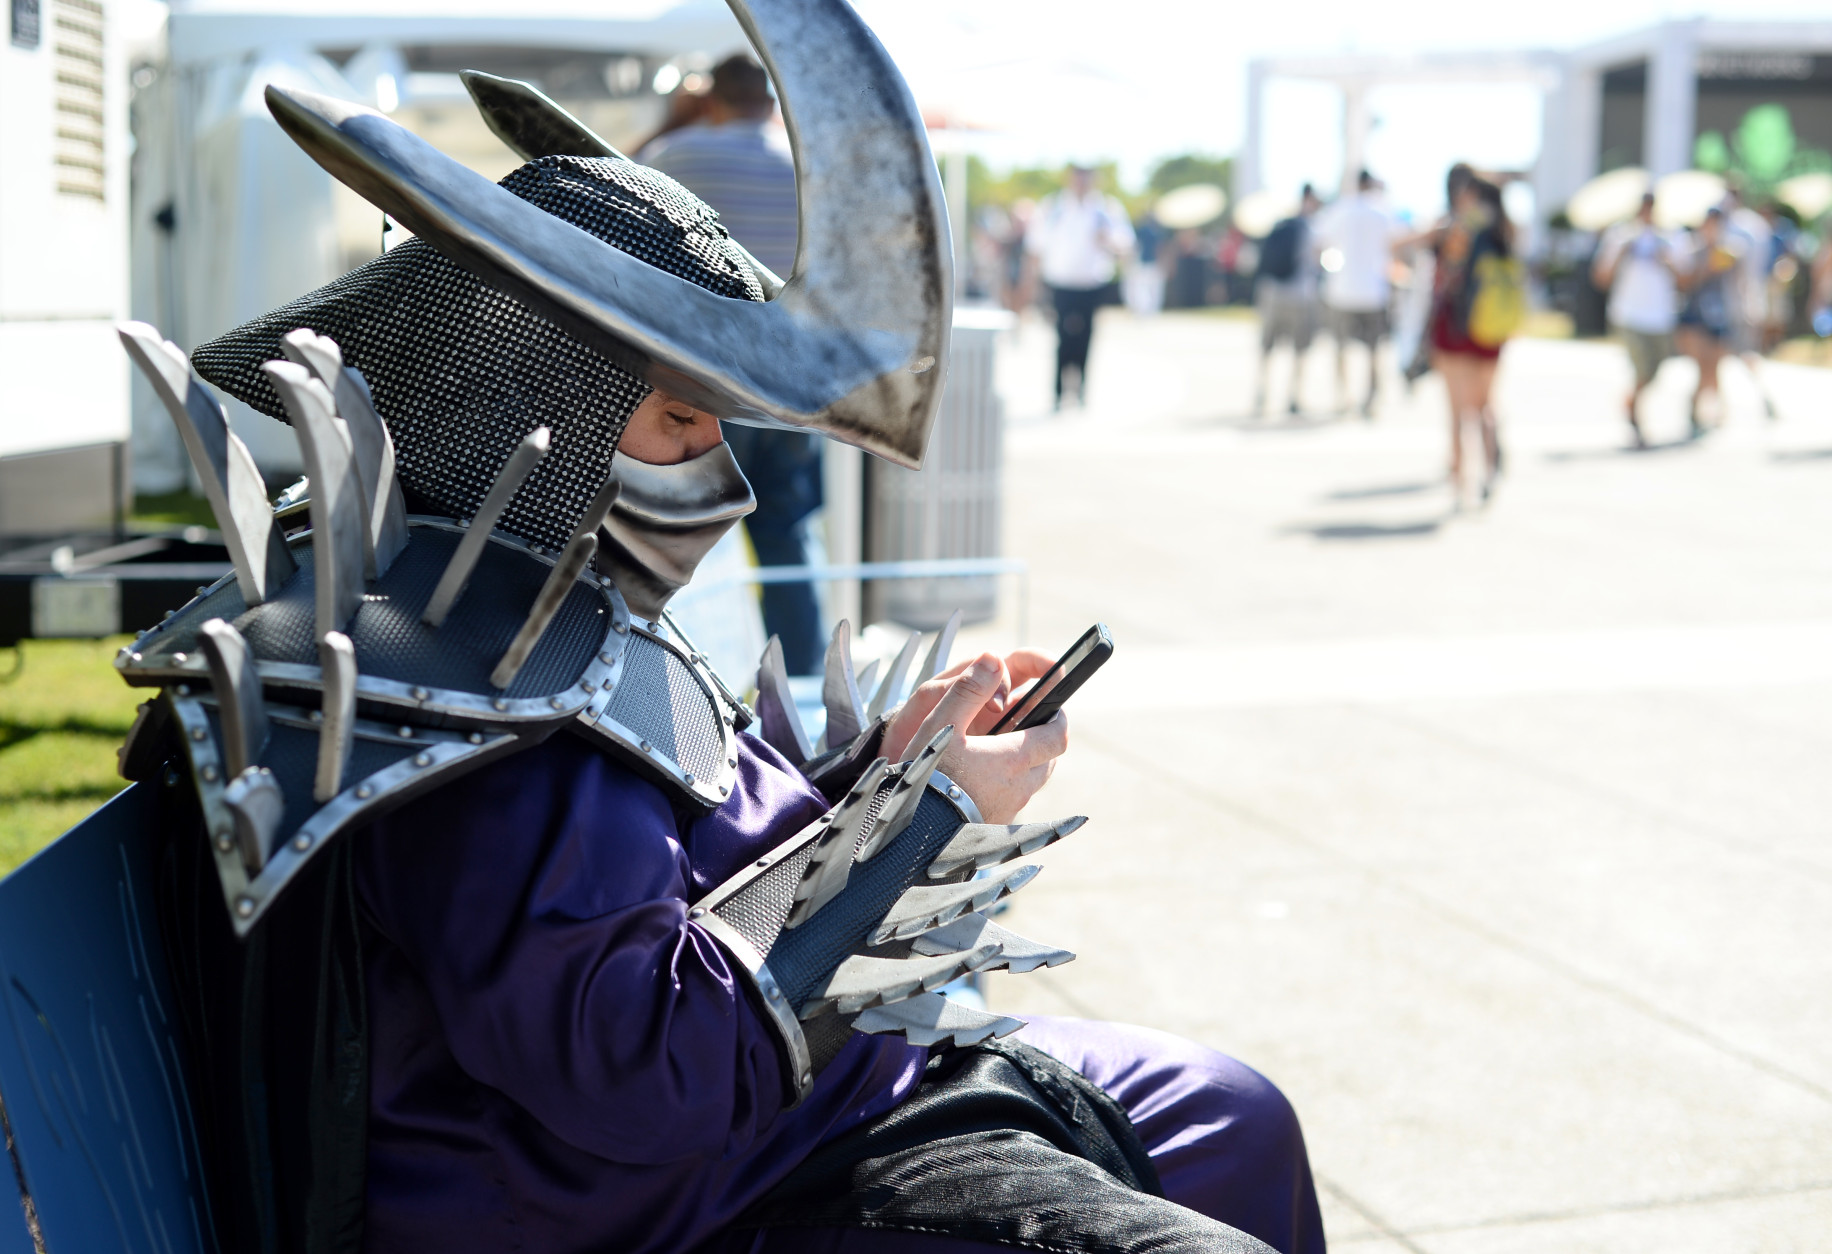 A fan dressed as Super Shredder checks his Instagram on day 2 of Comic-Con International on Friday, July 22, 2016, in San Diego. (Photo by Al Powers/Invision/AP)